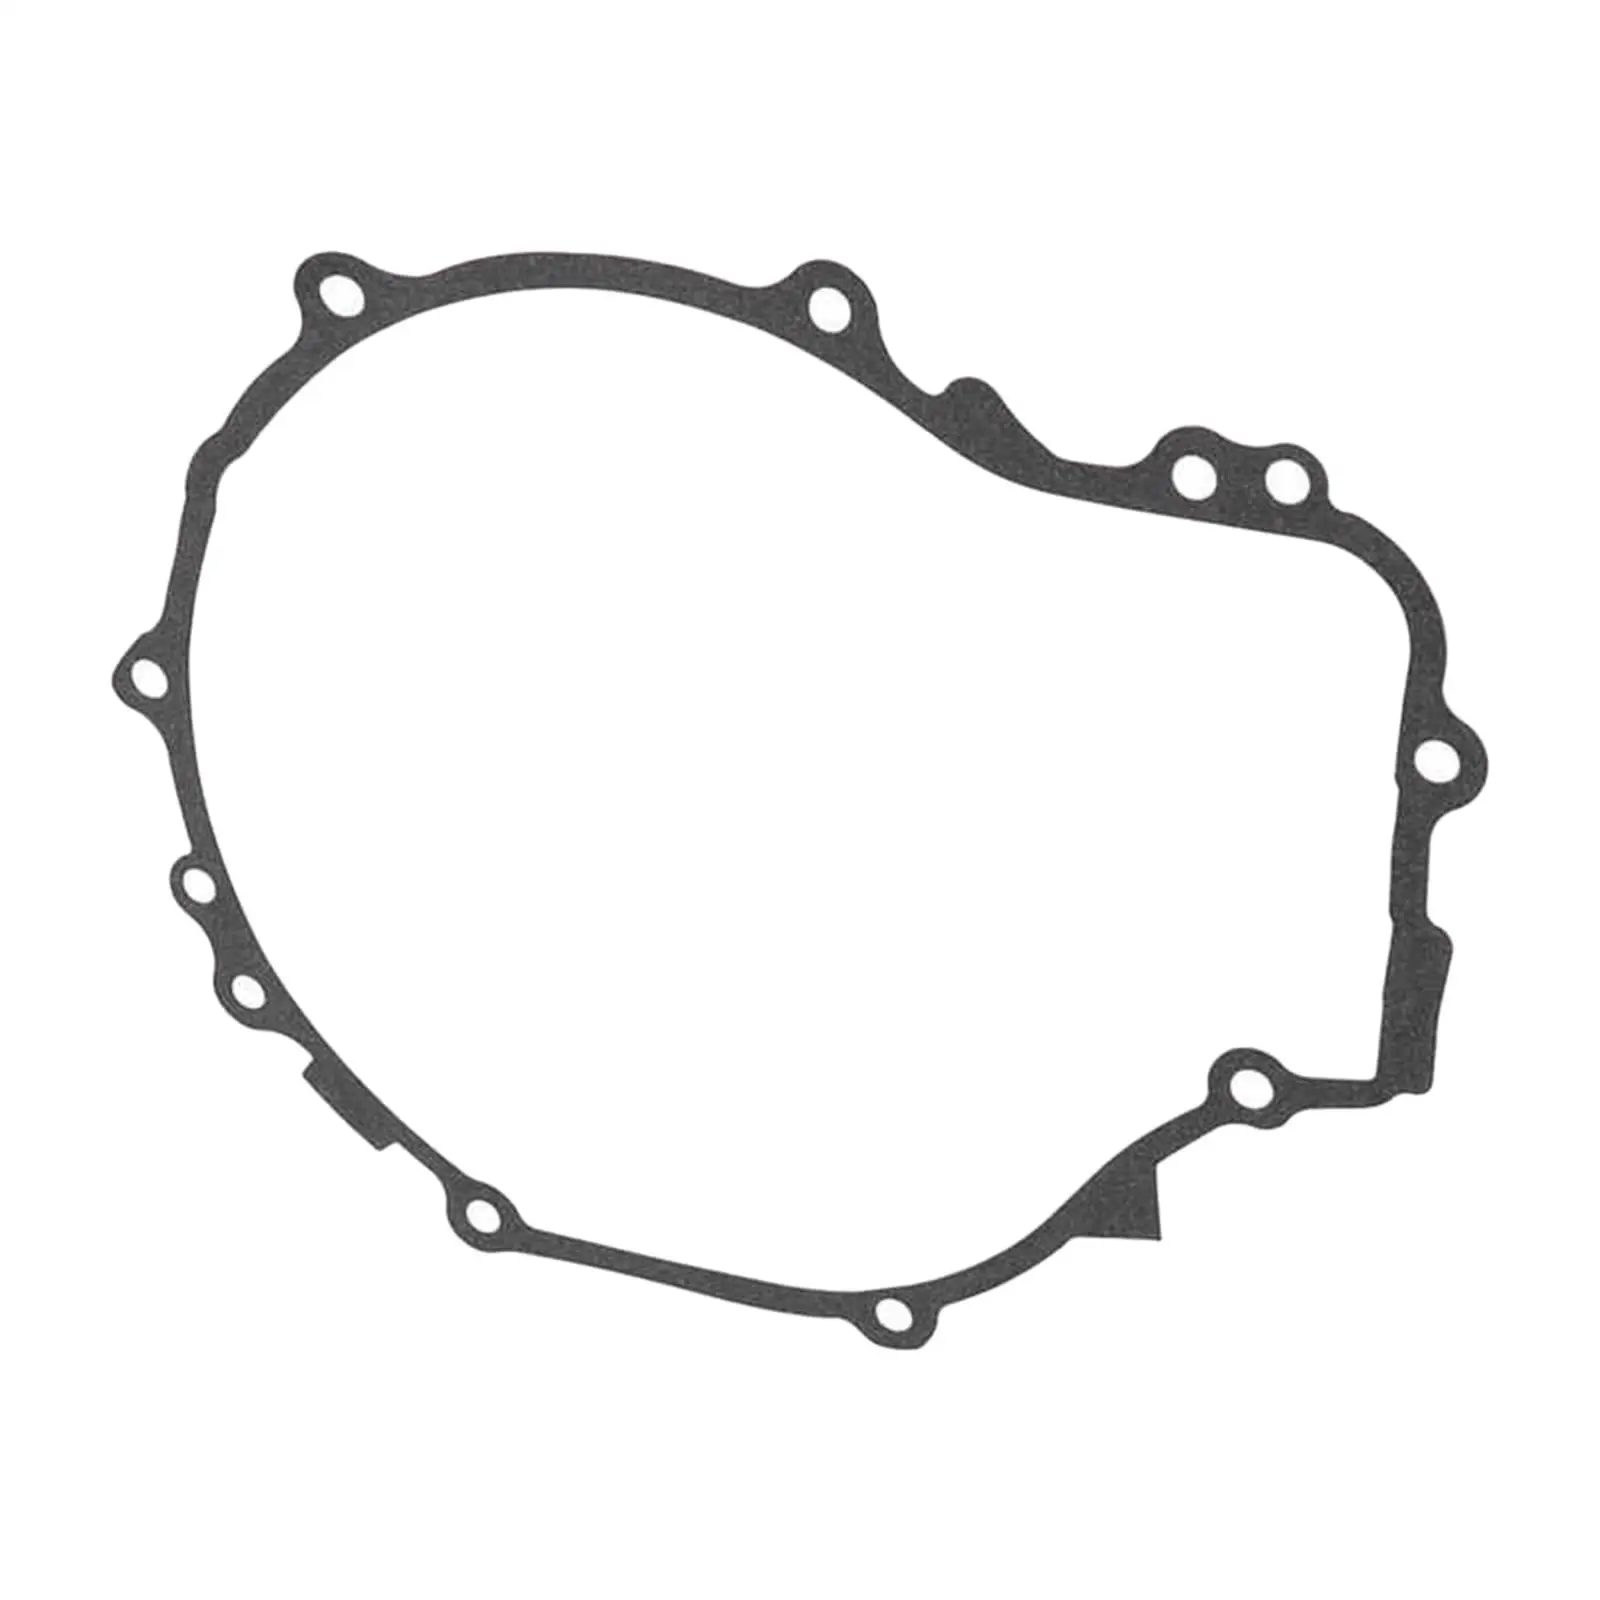 Car Pull Start Gasket 3084933 for Polaris Sportsman 500 Replace Easy